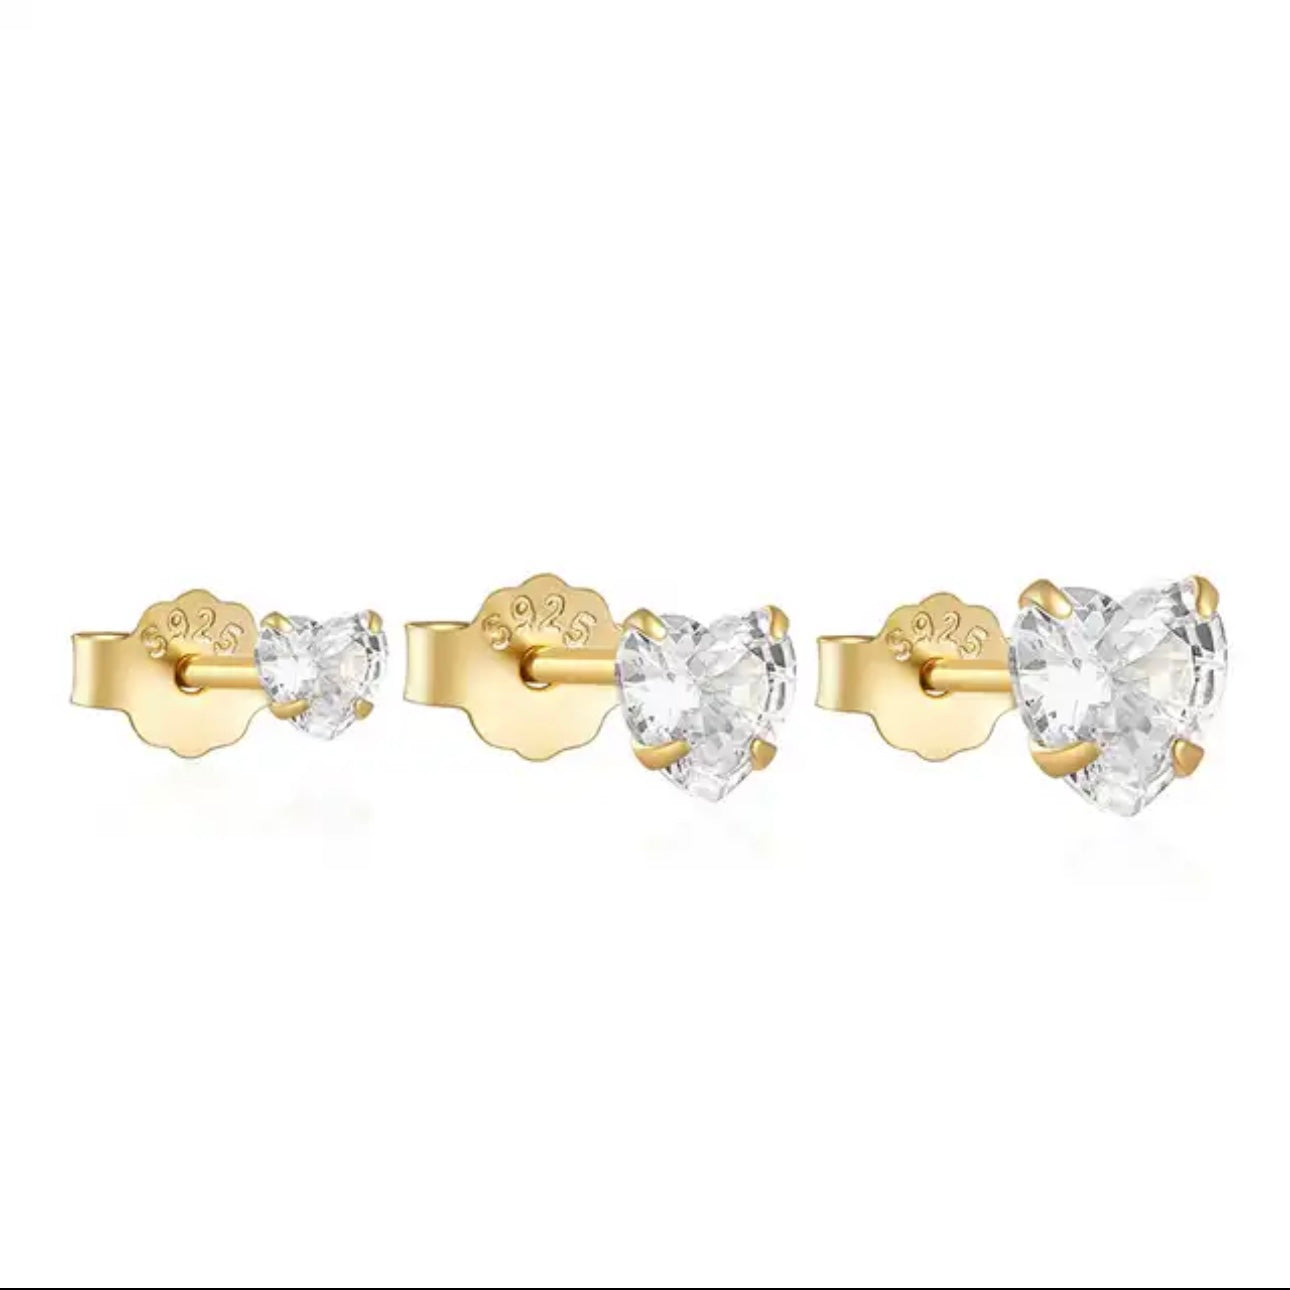 Heart Studs - 3 Sizes (Set of 3 Pairs) (Gold/Silver)